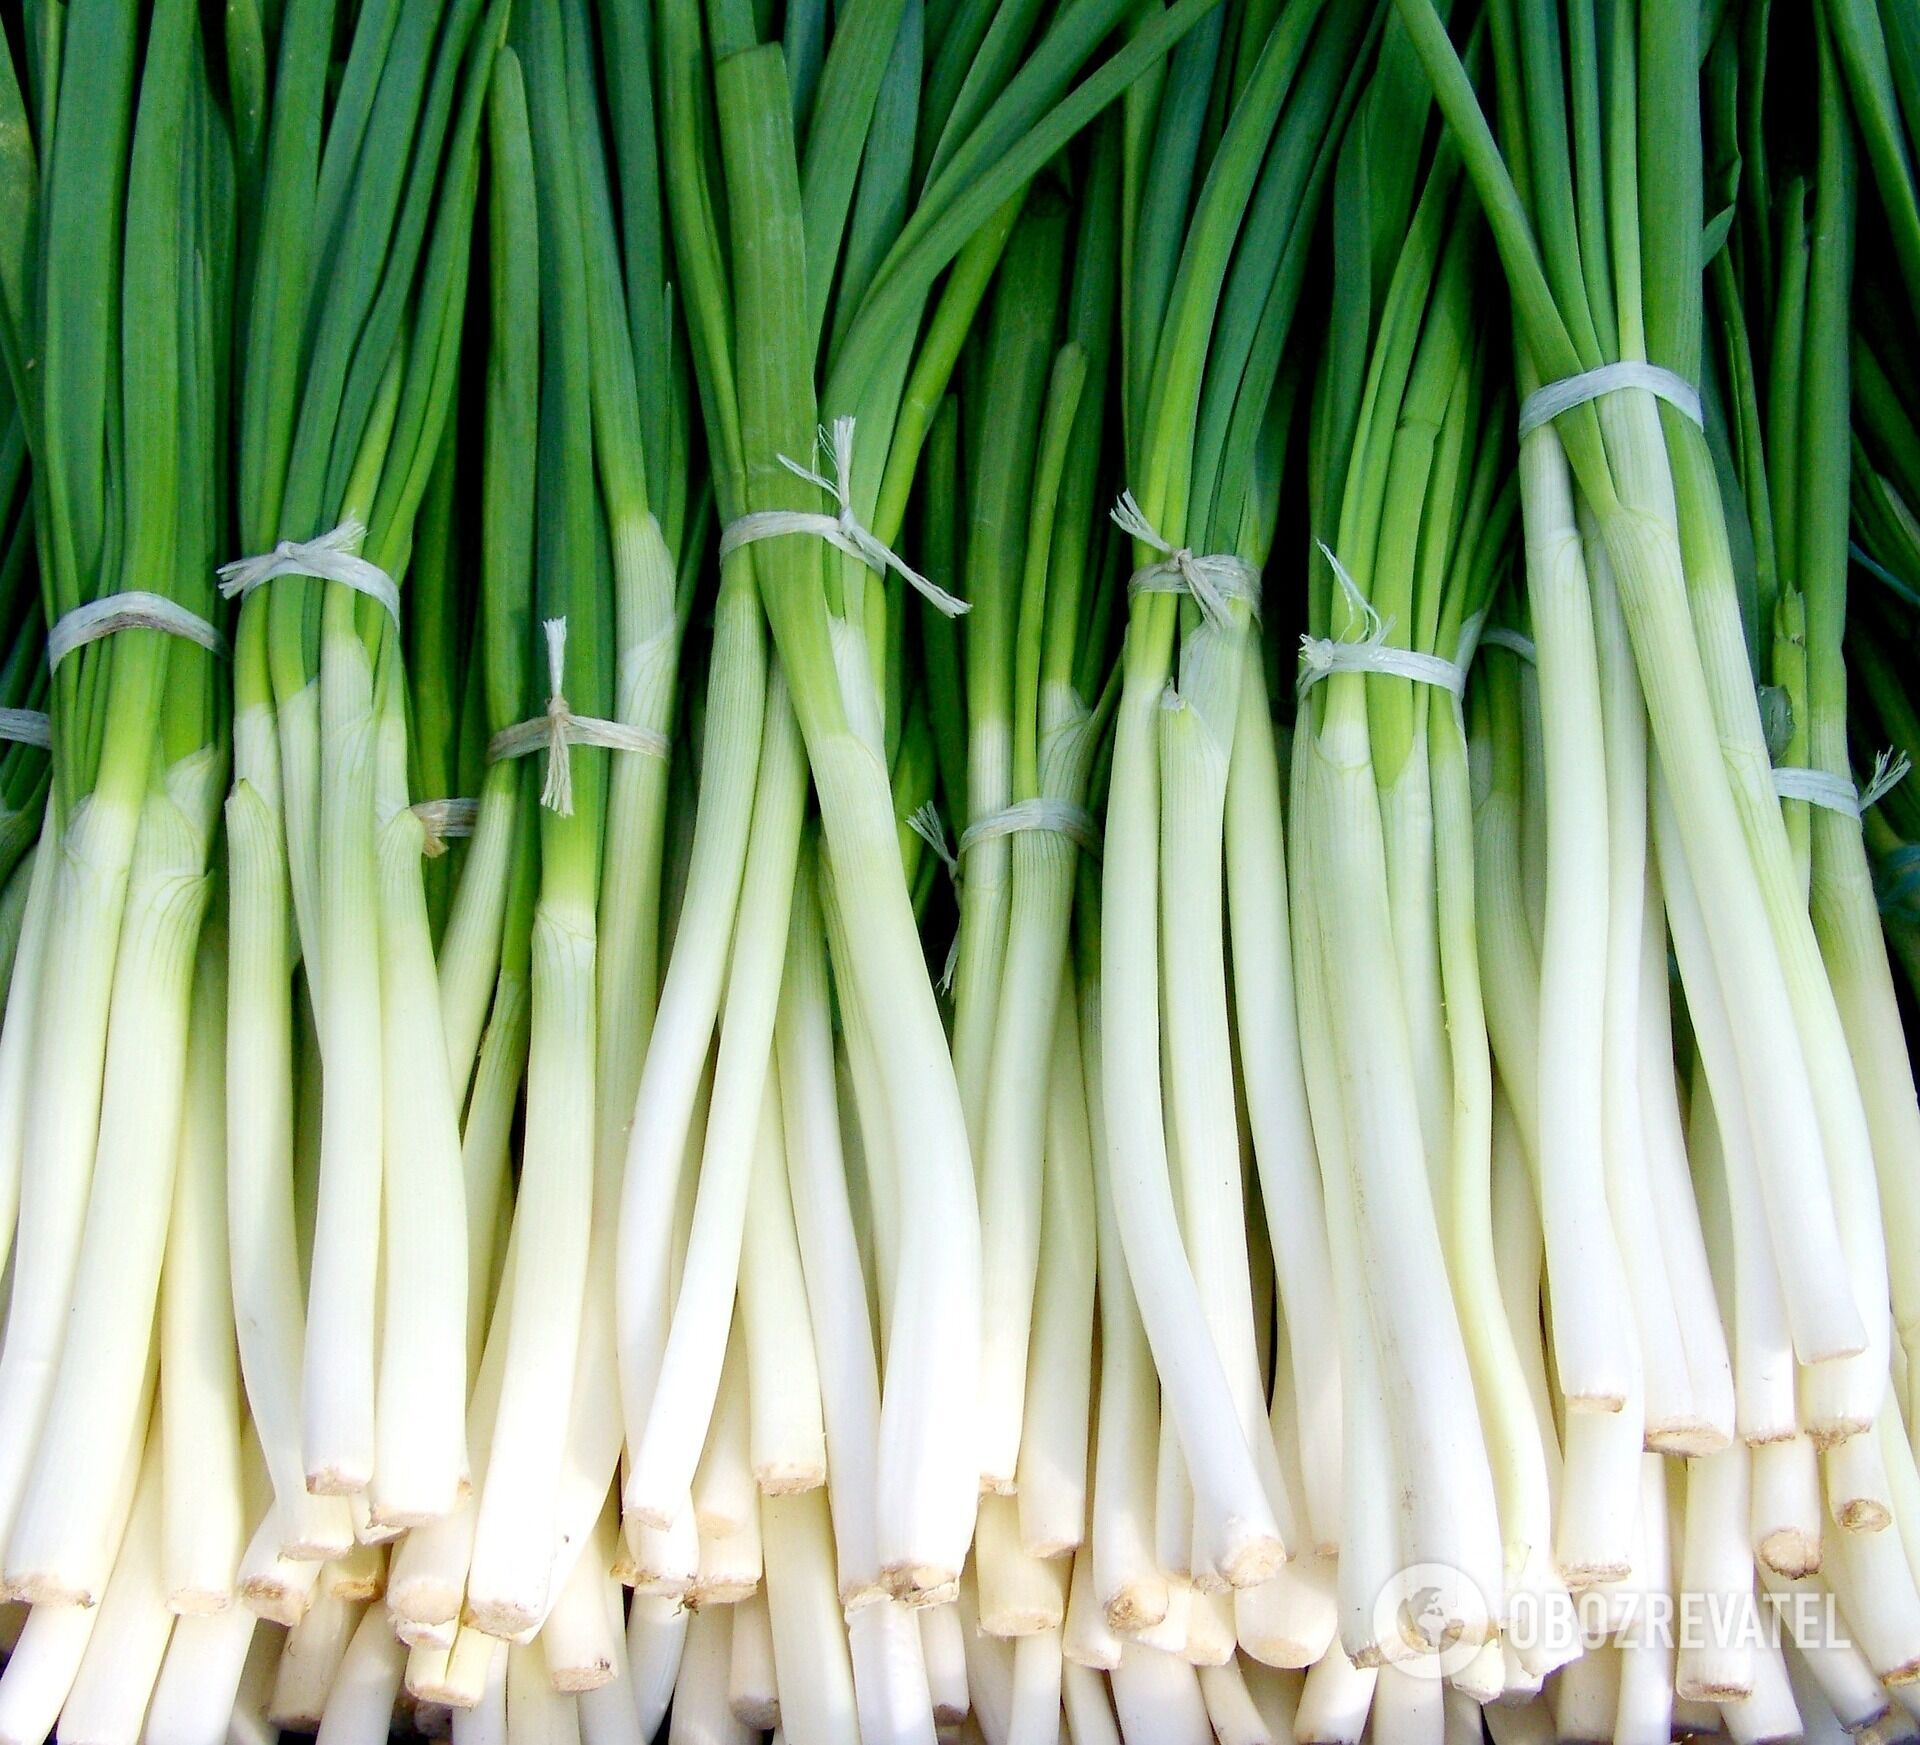 Green onions for a dish